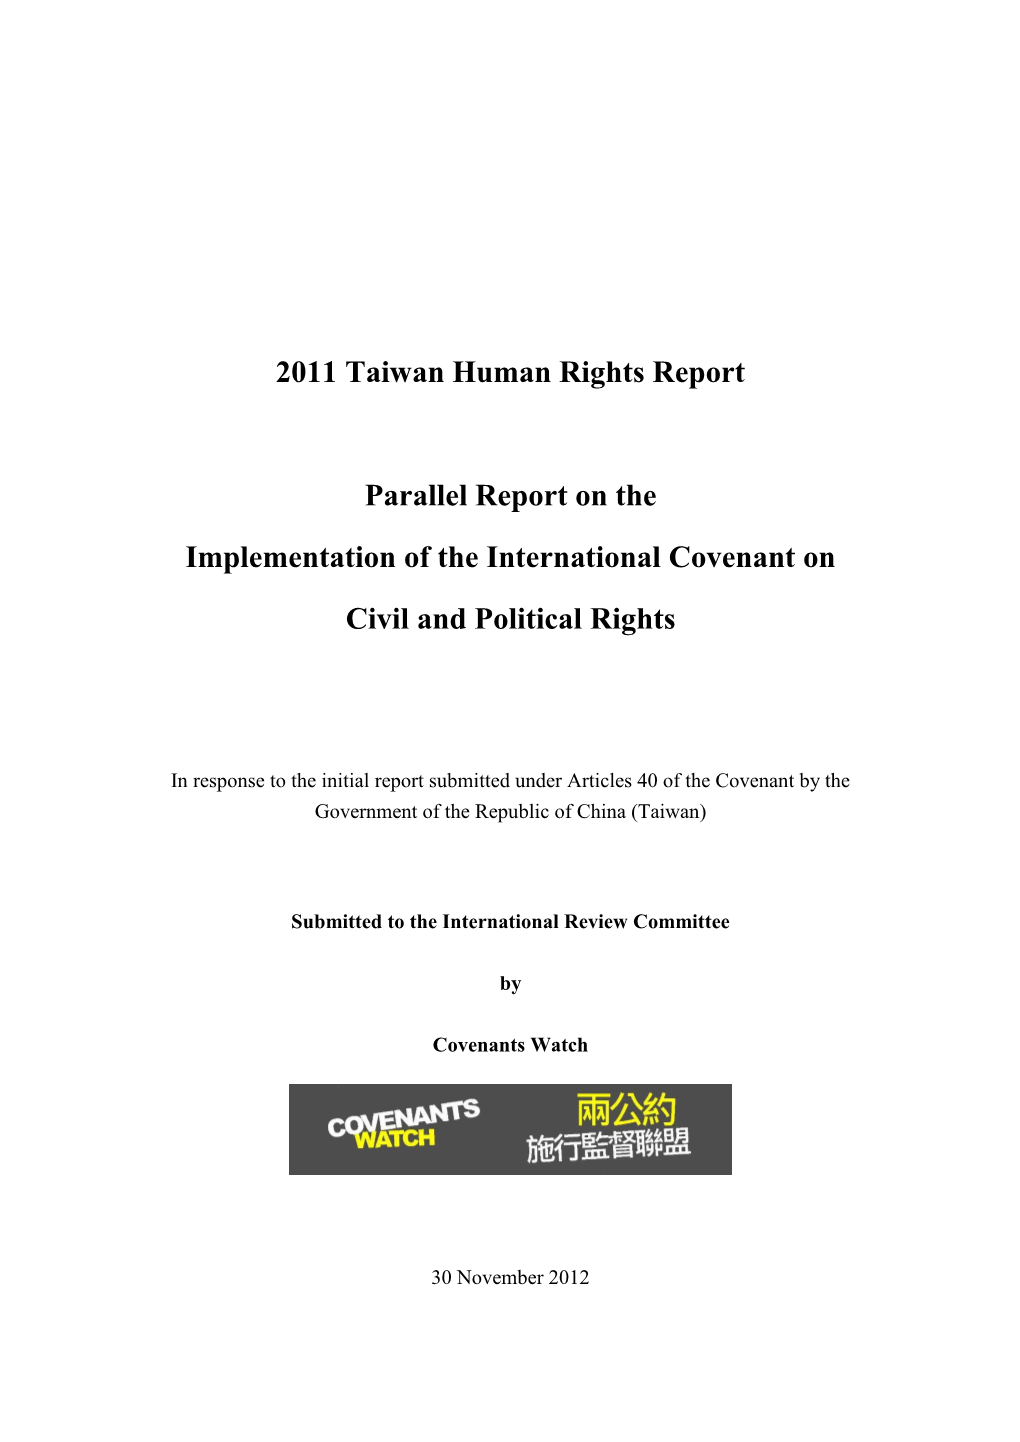 2011 Taiwan Human Rights Report Parallel Report on The